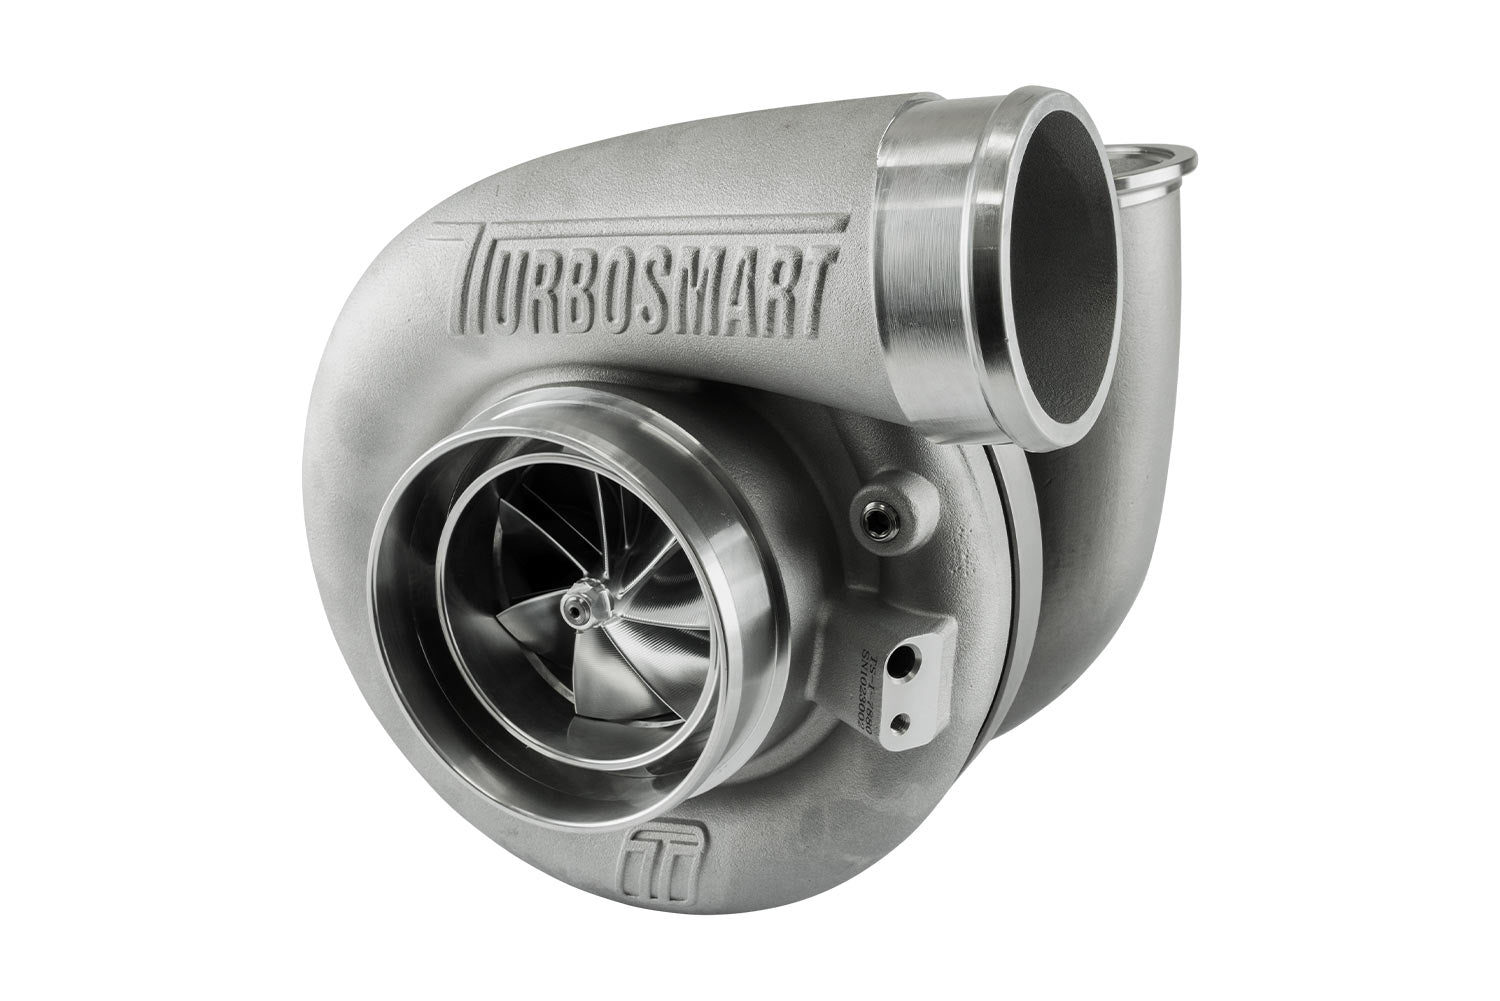 TS-2 Performance Turbocharger (Water Cooled) 7170 V-Band 0.96AR Externally Wastegated